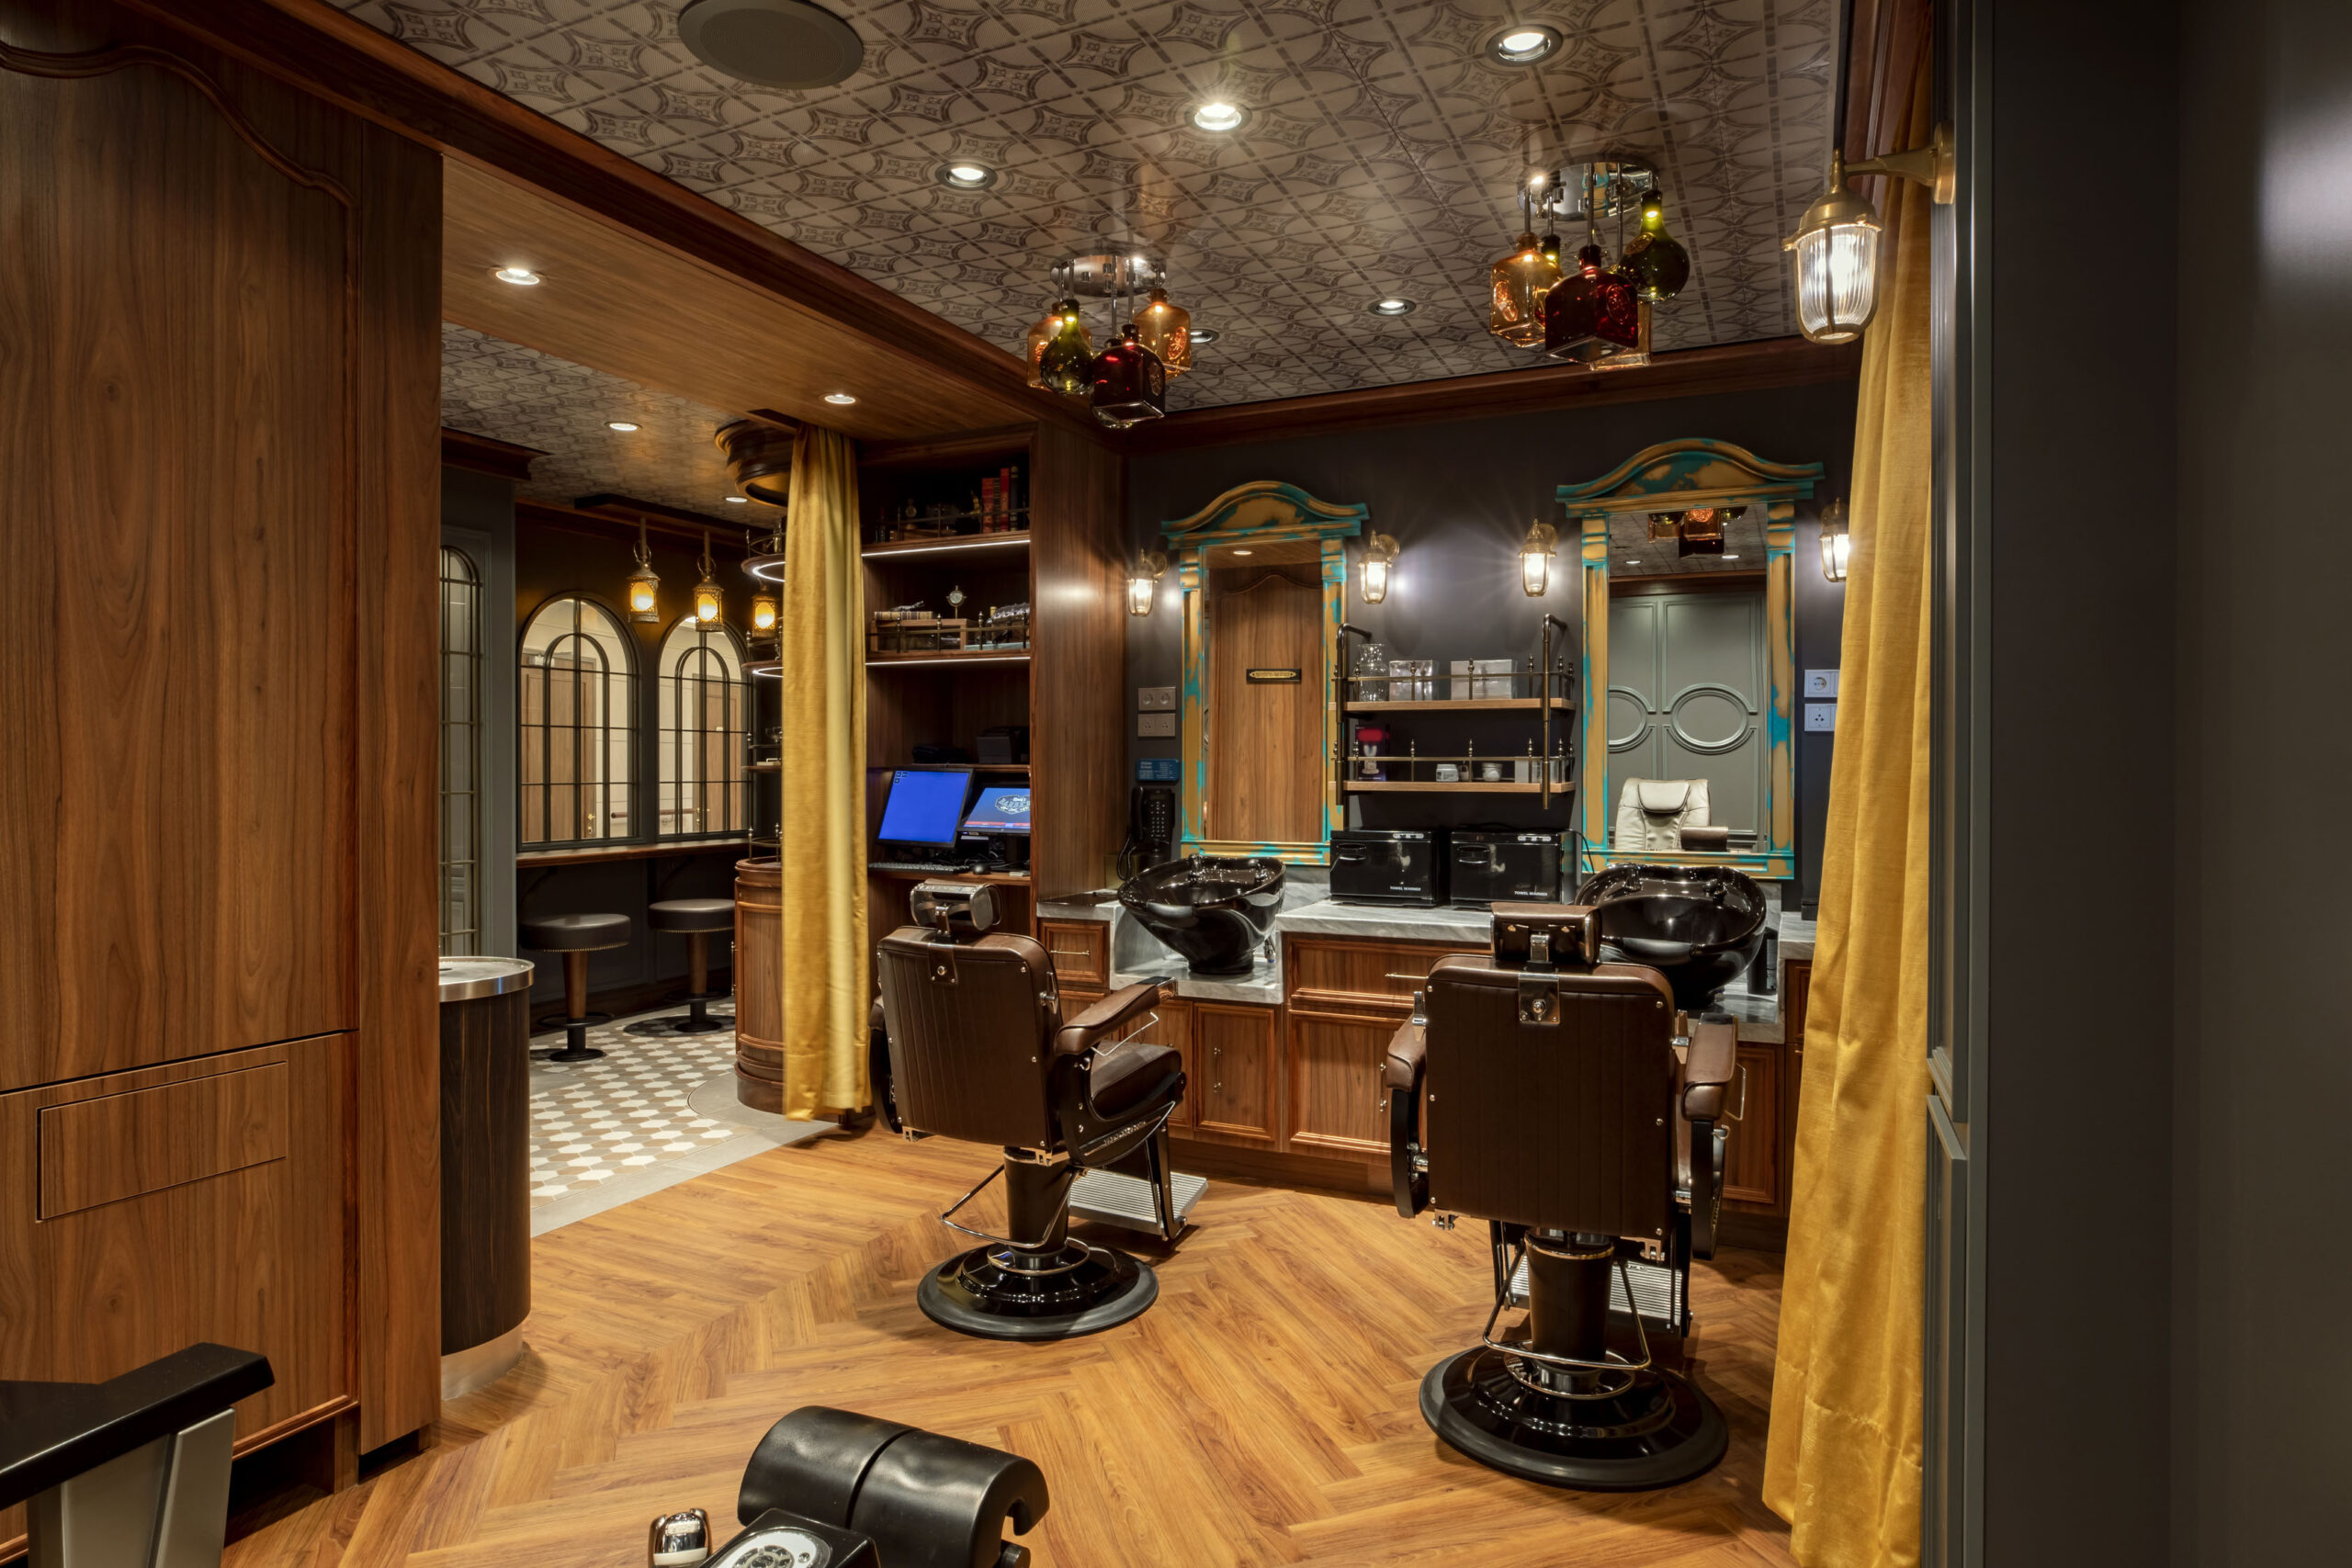 Hook’s Barbery, a twist on a traditional European men’s salon, will offer cuts, shaves, and nail and skin care onboard the Disney Treasure. The space will brim with narrative details inspired by its namesake, Captain Hook. Not only will Hook’s Barbery provide salon and barber services, but it will also boast the ultimate toast to a pirate’s life: a hidden bar. (Disney)